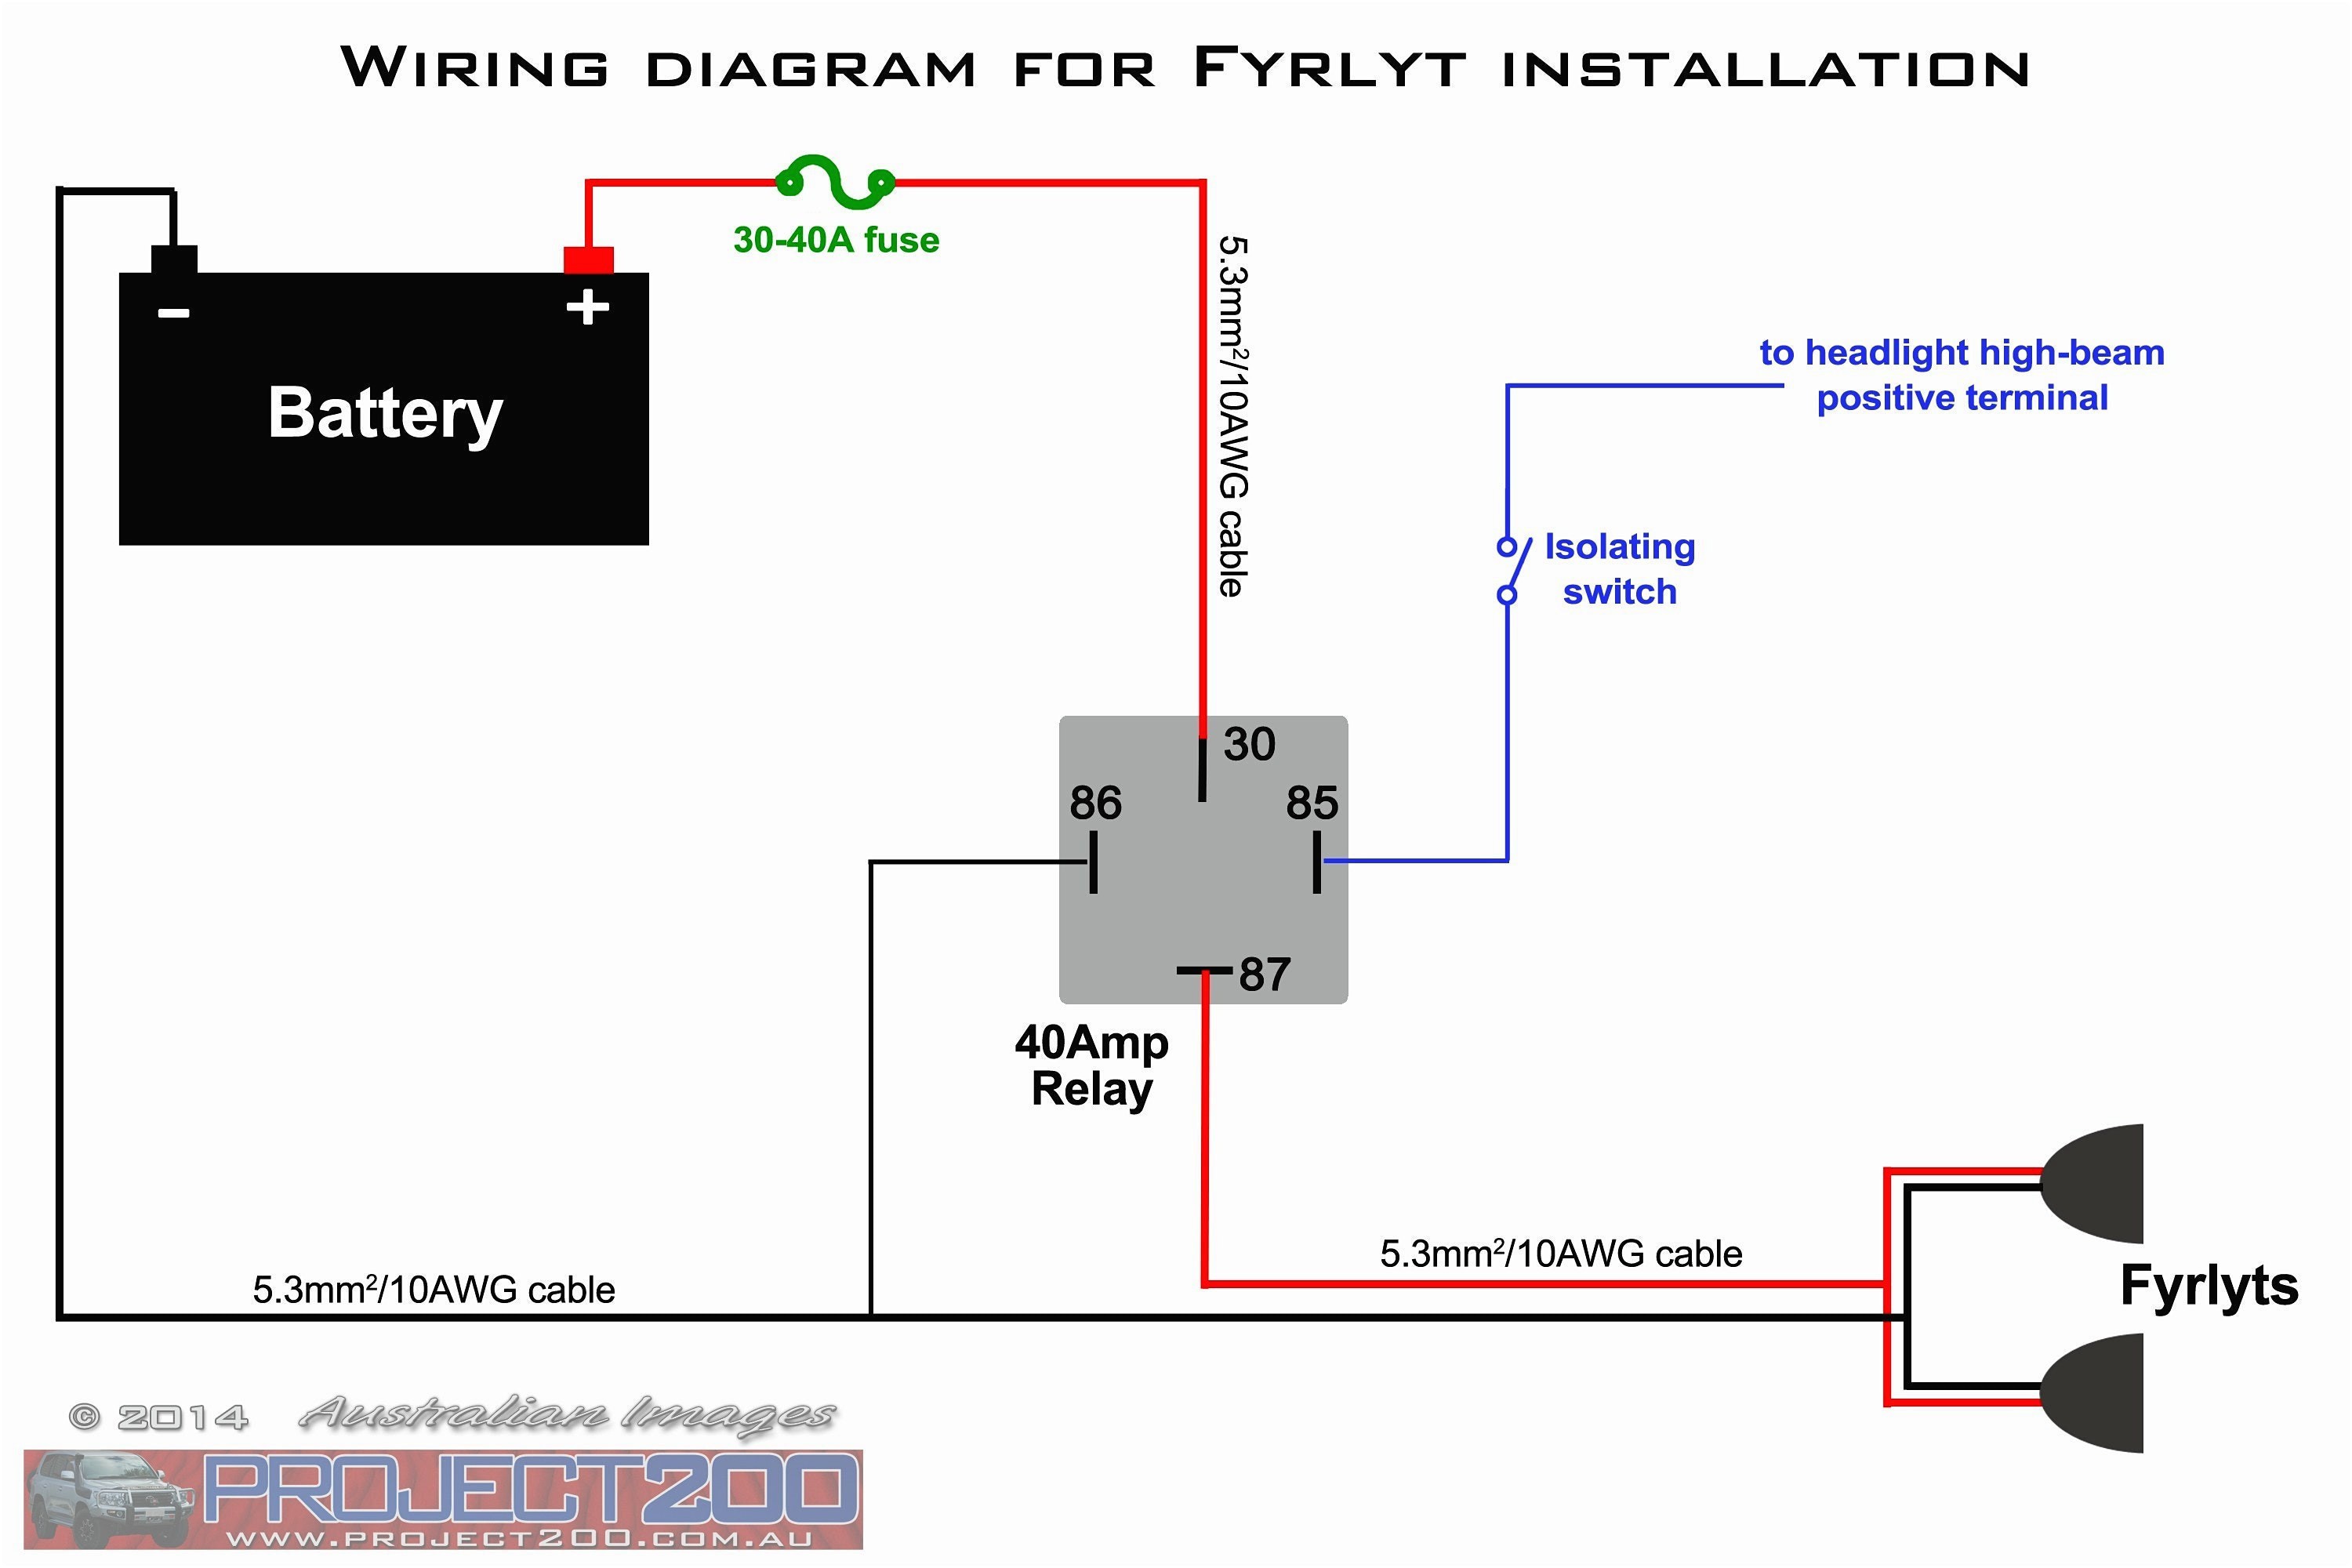 hid wiring diagram with relay Download Wiring Diagram For Hid Relay Save Hid Wiring Diagram DOWNLOAD Wiring Diagram